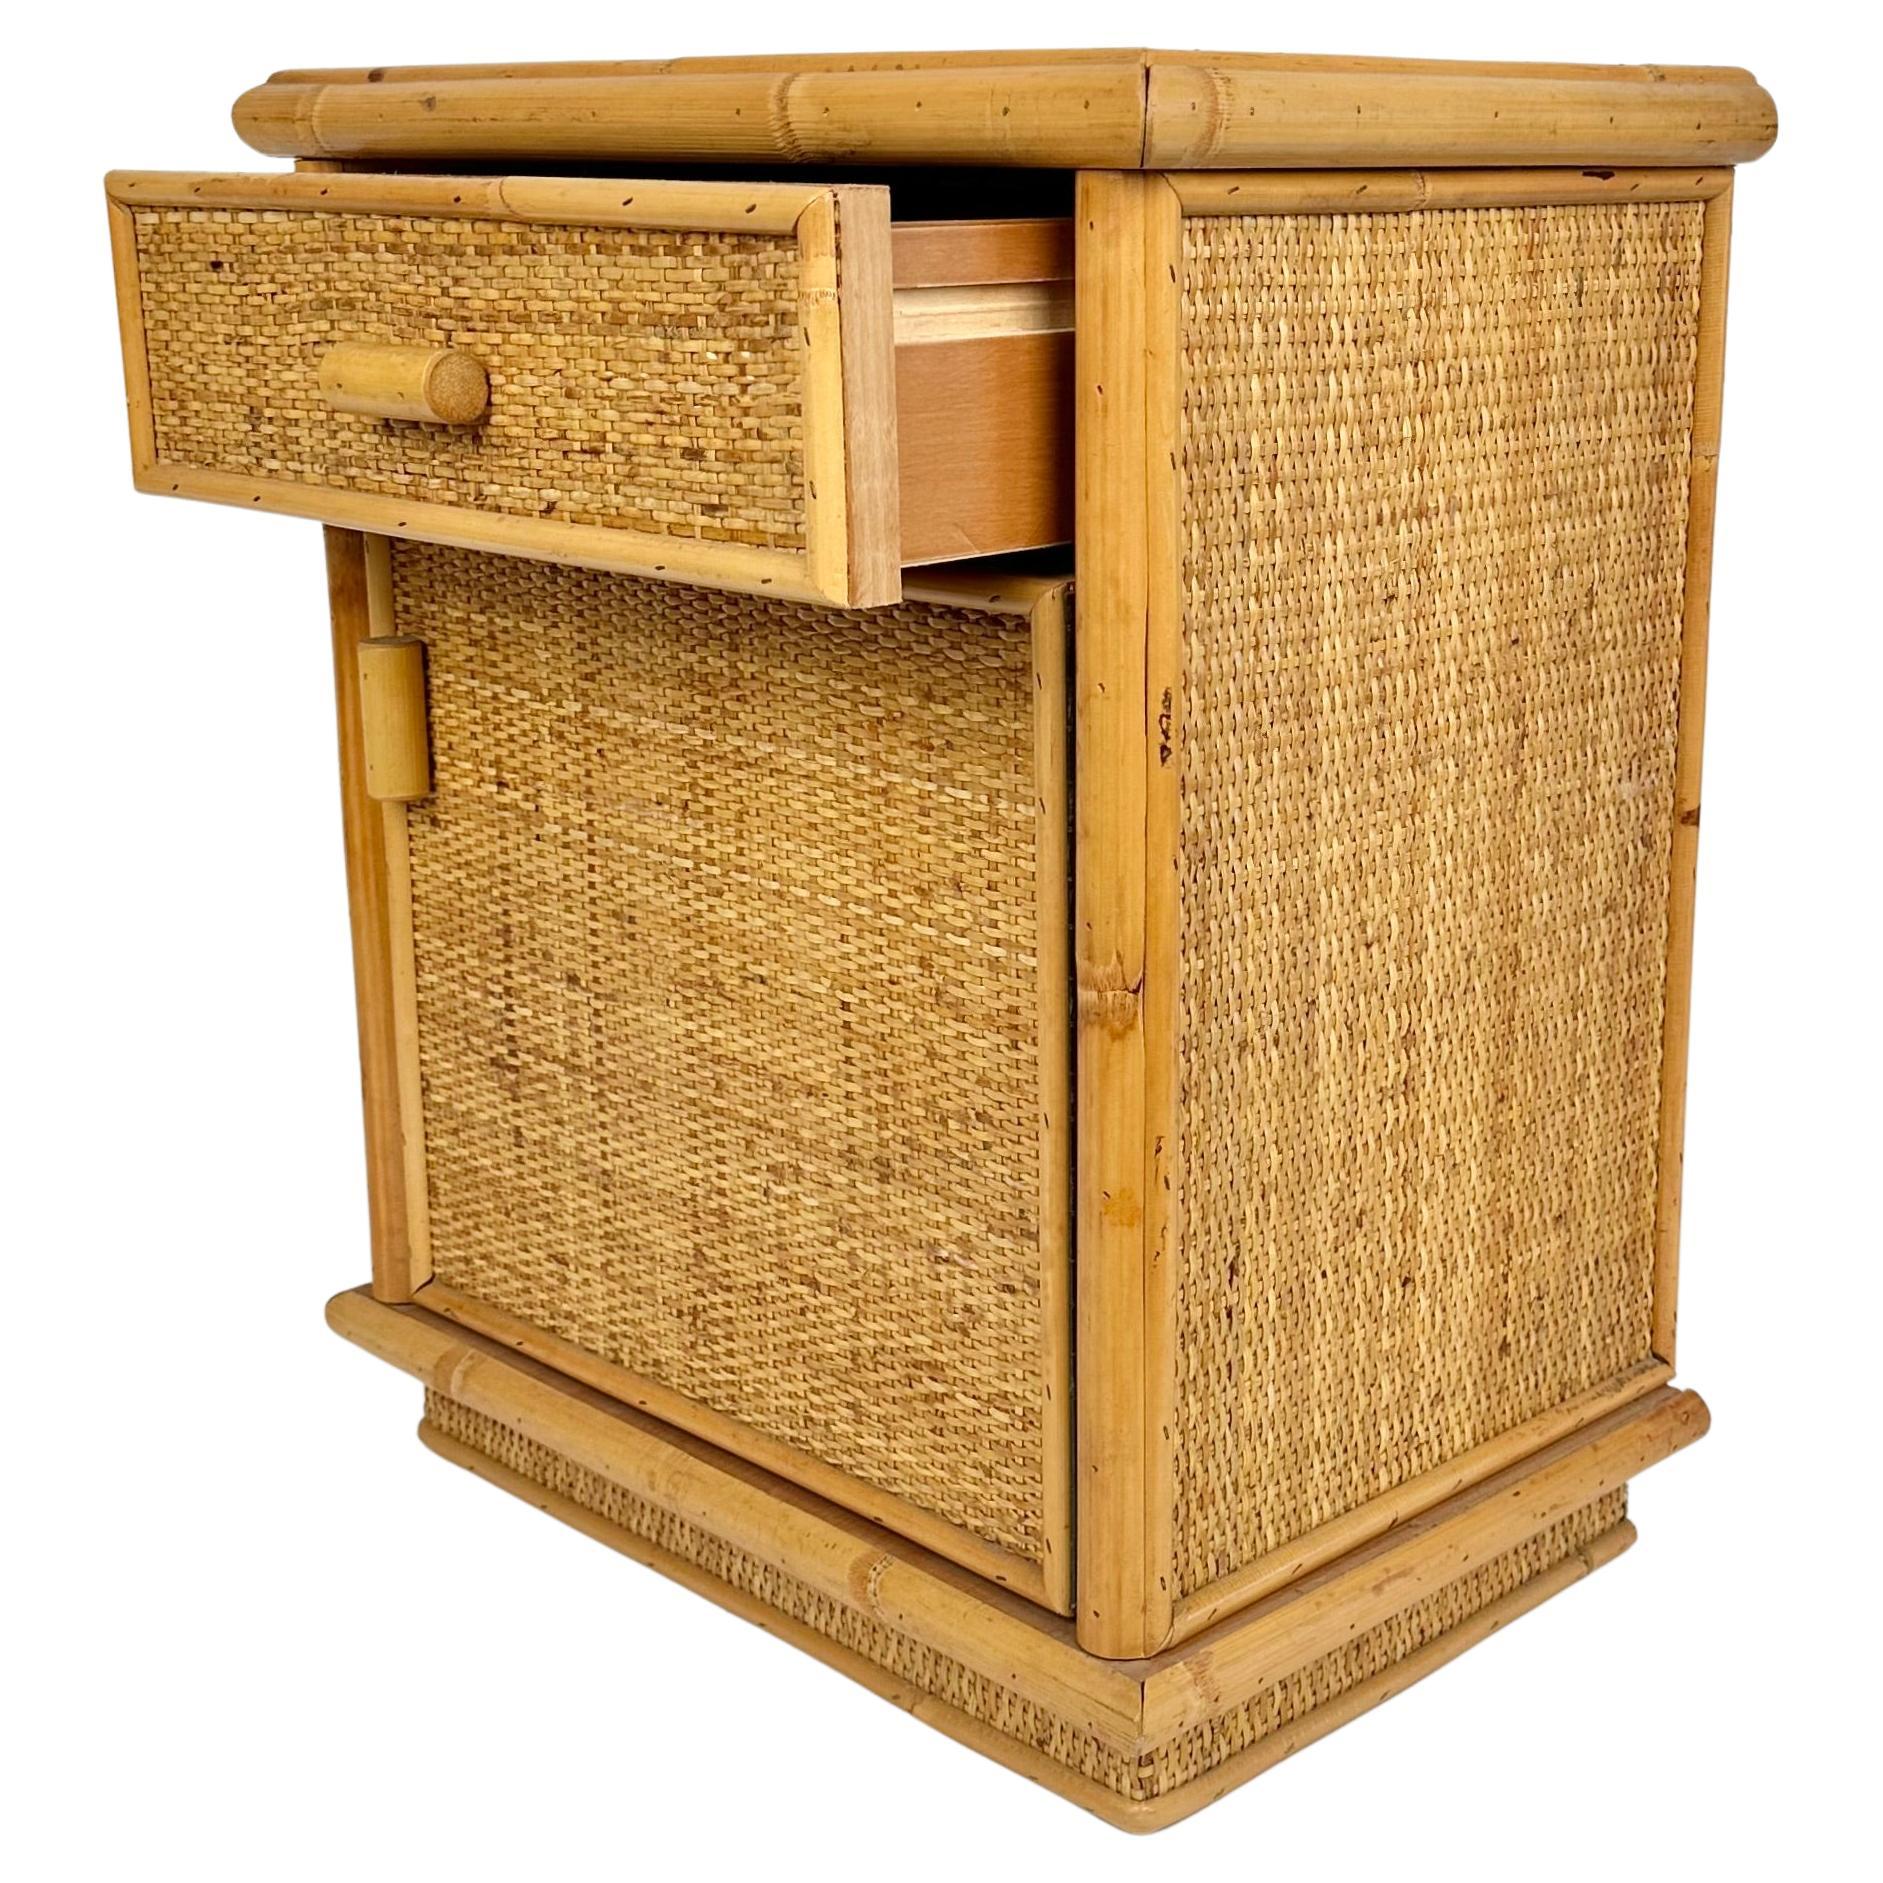 Midcentury Pair of Bed Side Tables Nightstands in Bamboo & Rattan, Italy, 1970s For Sale 4